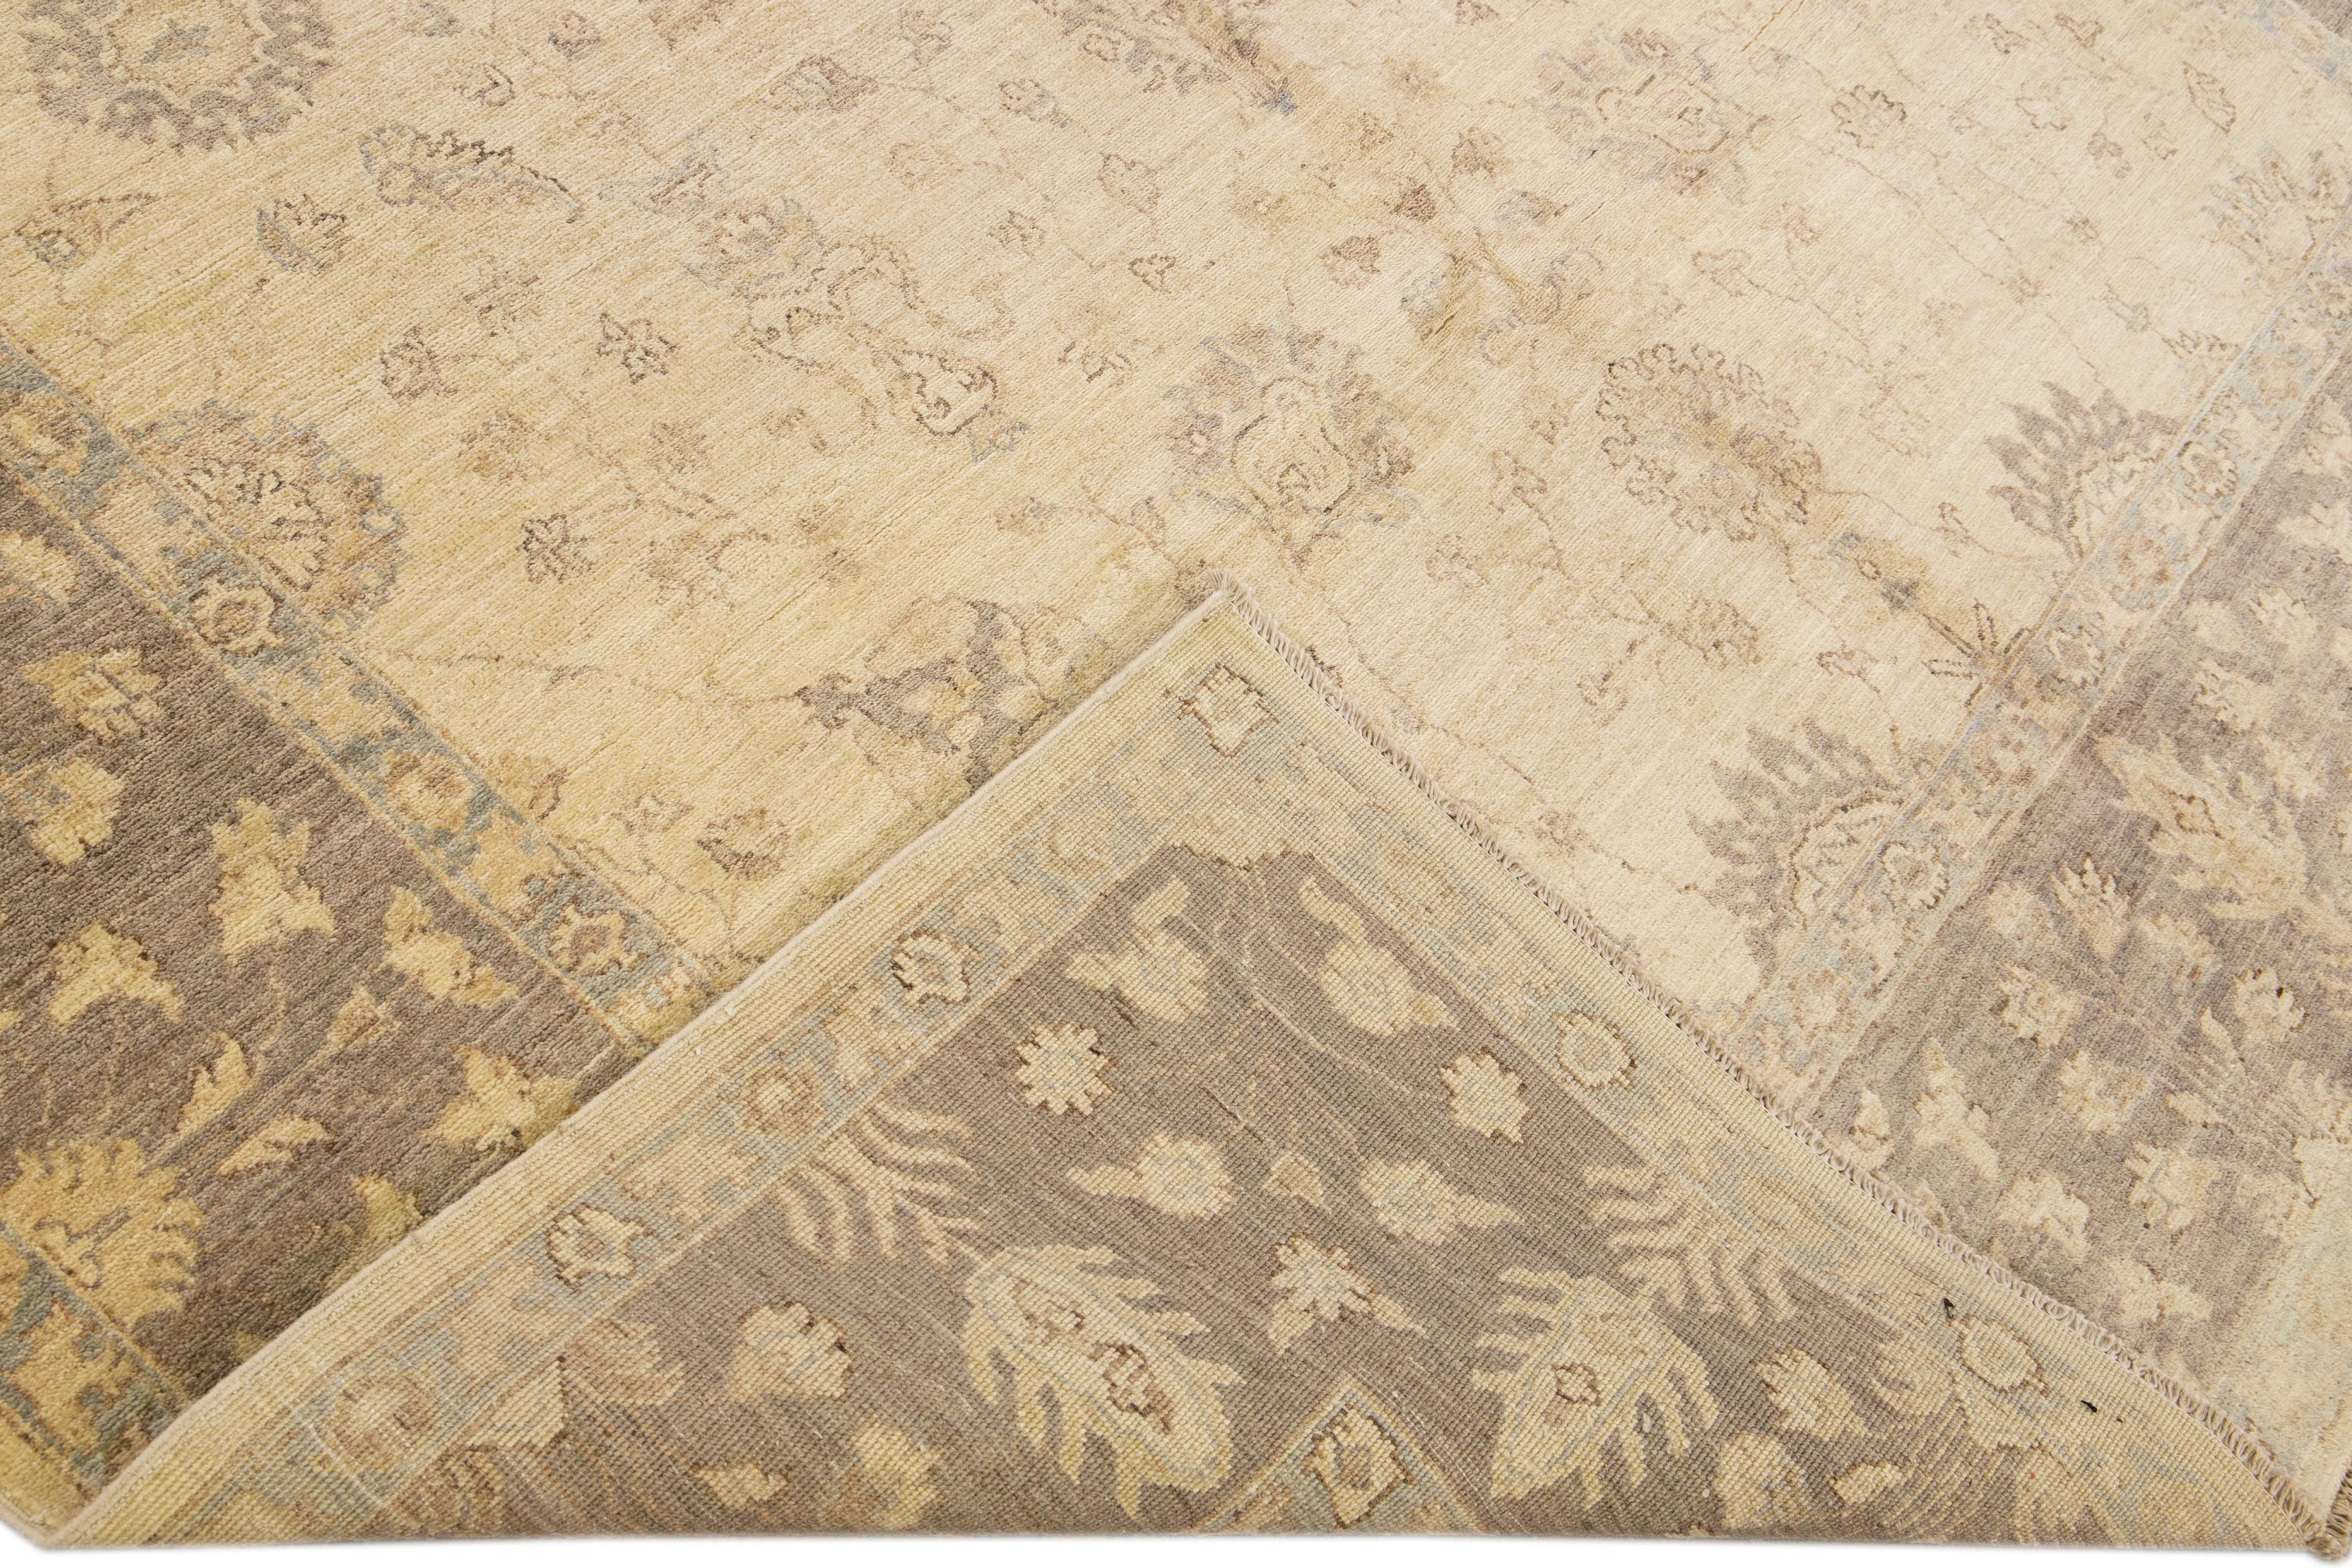 Beautiful Paki Peshawar hand-knotted wool rug with a beige field. This modern rug has beige, gray, and blue accents in a gorgeous all-over Classic vine scroll and a palmettes motif.

This rug measures: 8' x 9'9